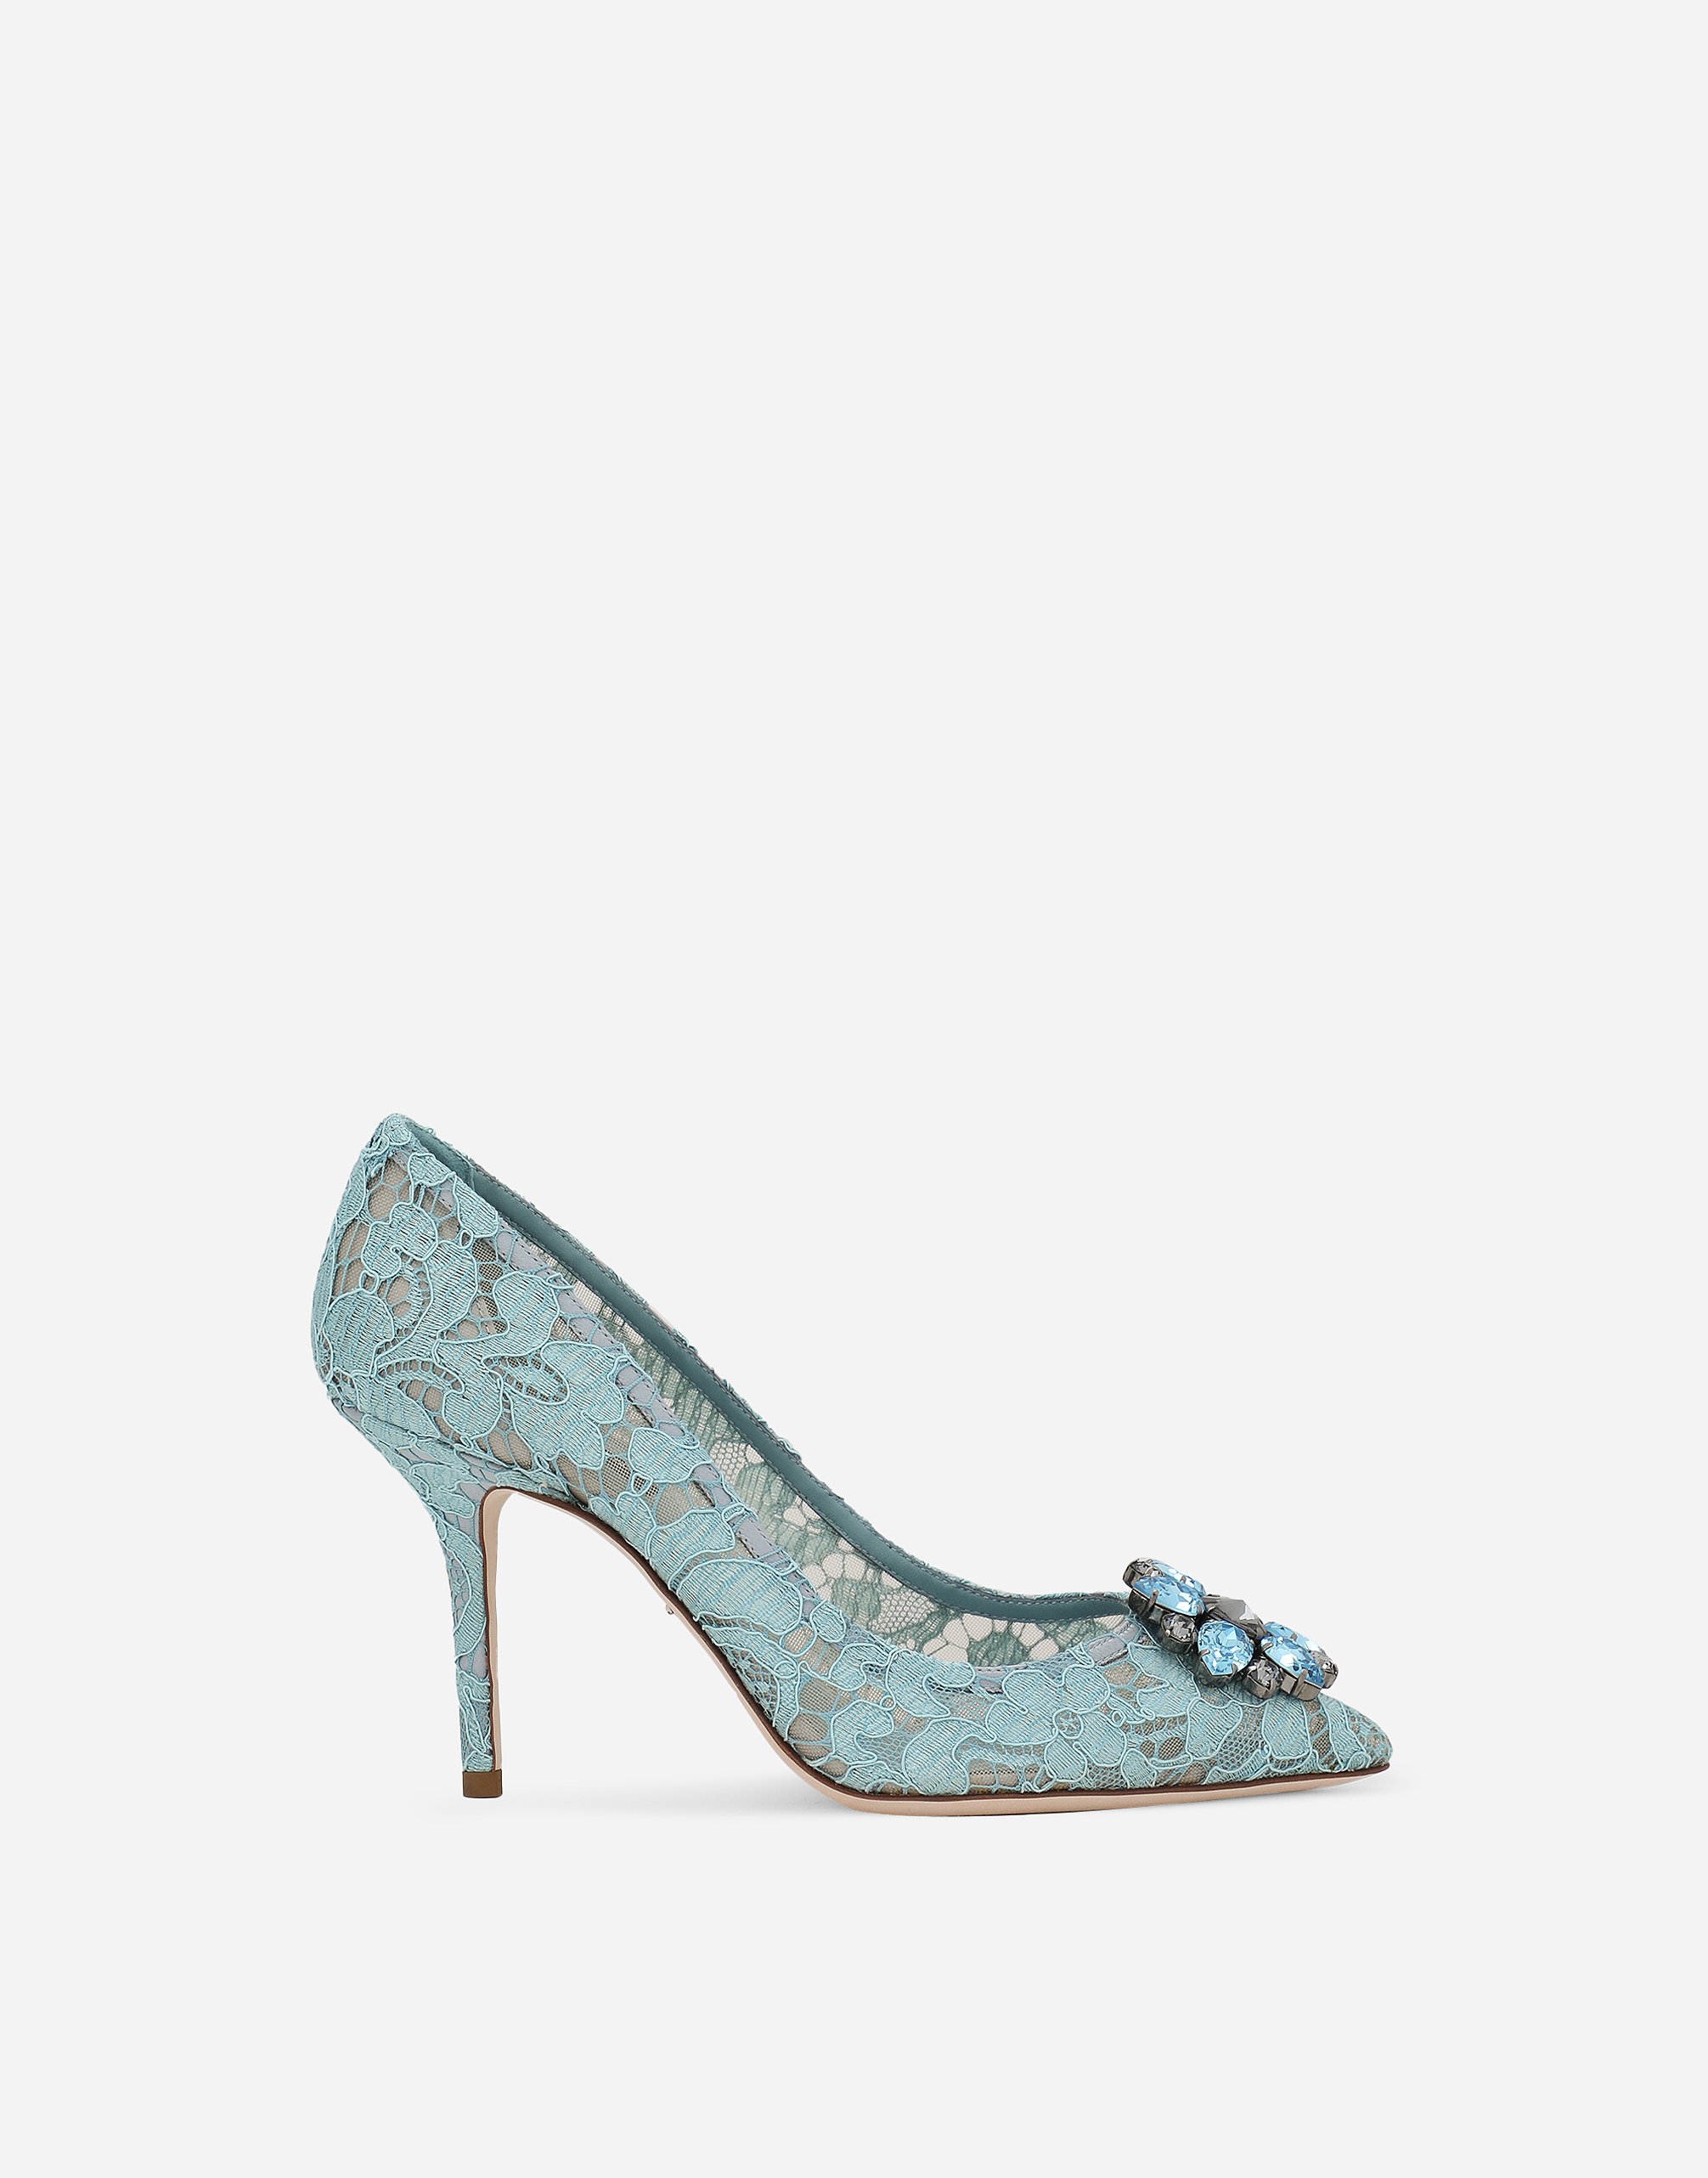 Pump in Taormina lace with crystals in Azure